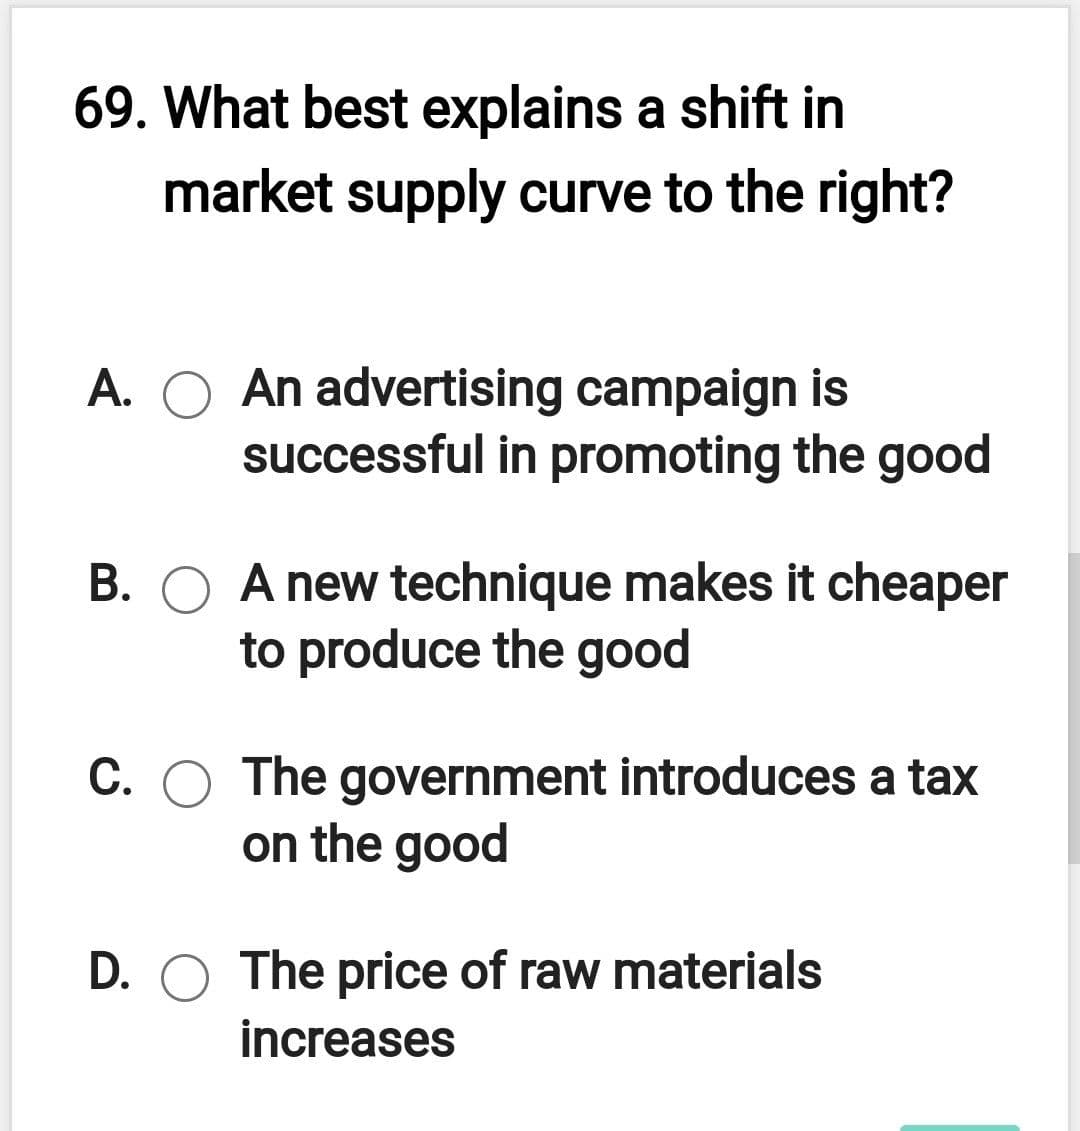 69. What best explains a shift in
market supply curve to the right?
A. O An advertising campaign is
successful in promoting the good
B. O A new technique makes it cheaper
to produce the good
C. O The government introduces a tax
on the good
D. O The price of raw materials
increases
